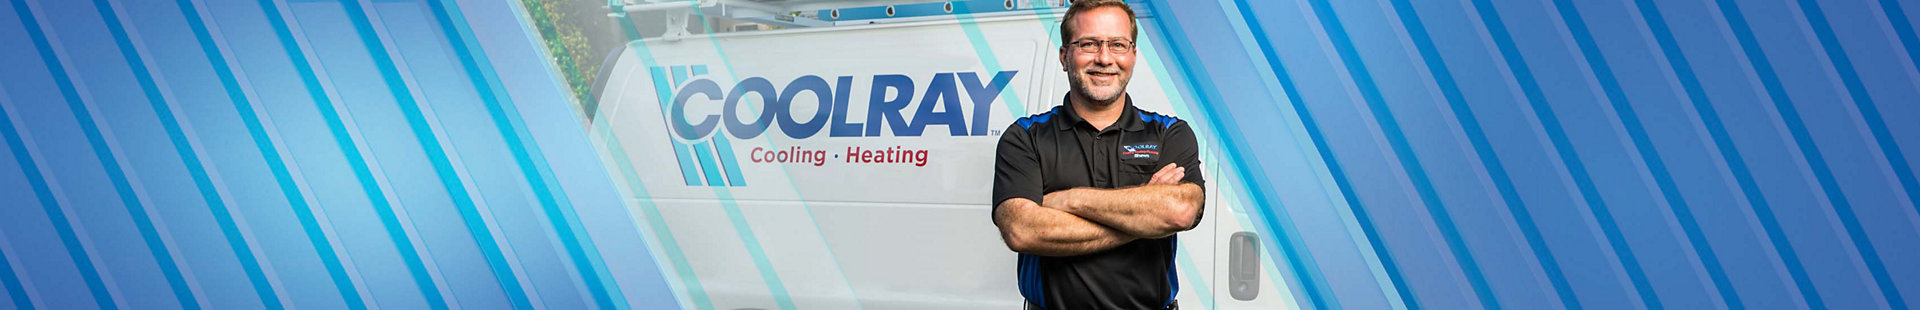 Coolray electrician in front of a service vehicle